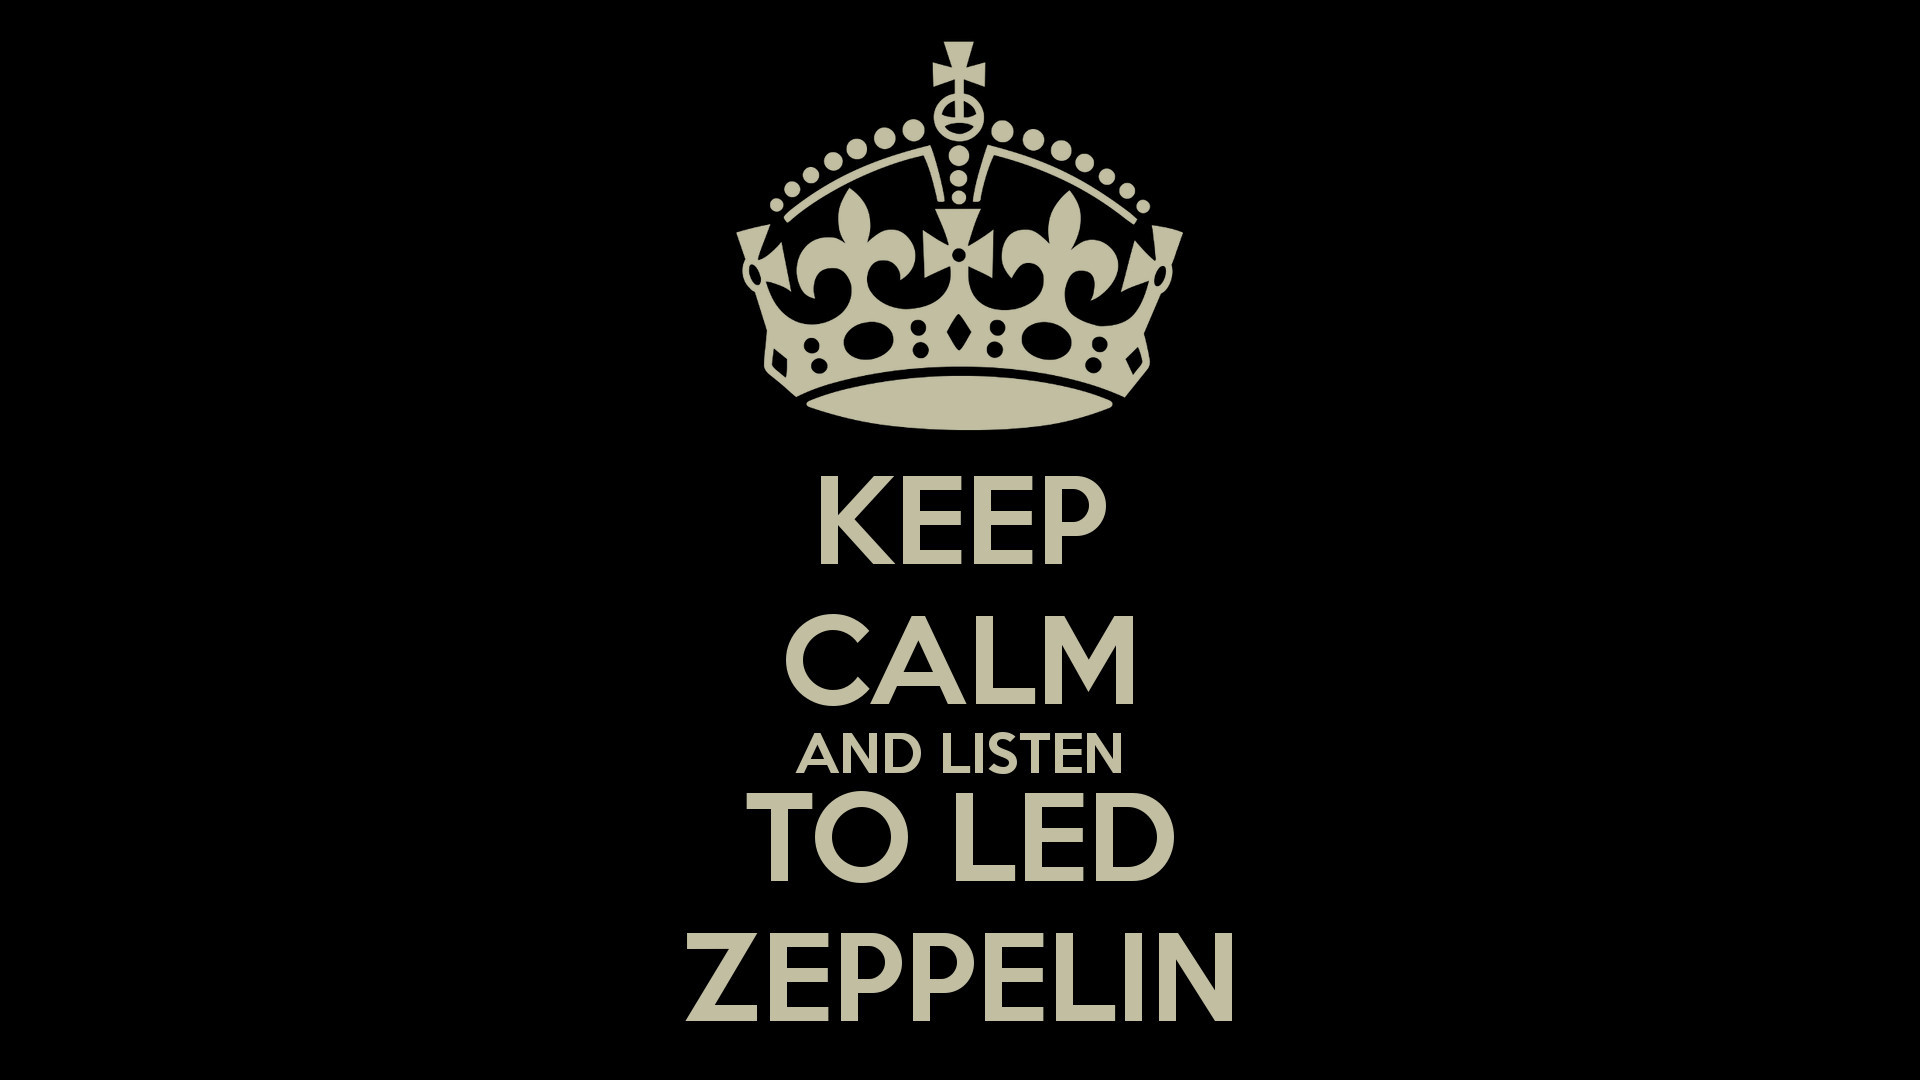 1920x1080  Jimmy Page HD Wallpapers For Desktop | Led Zeppelin | Pinterest |  Hd wallpaper, Led zeppelin and Zeppelin